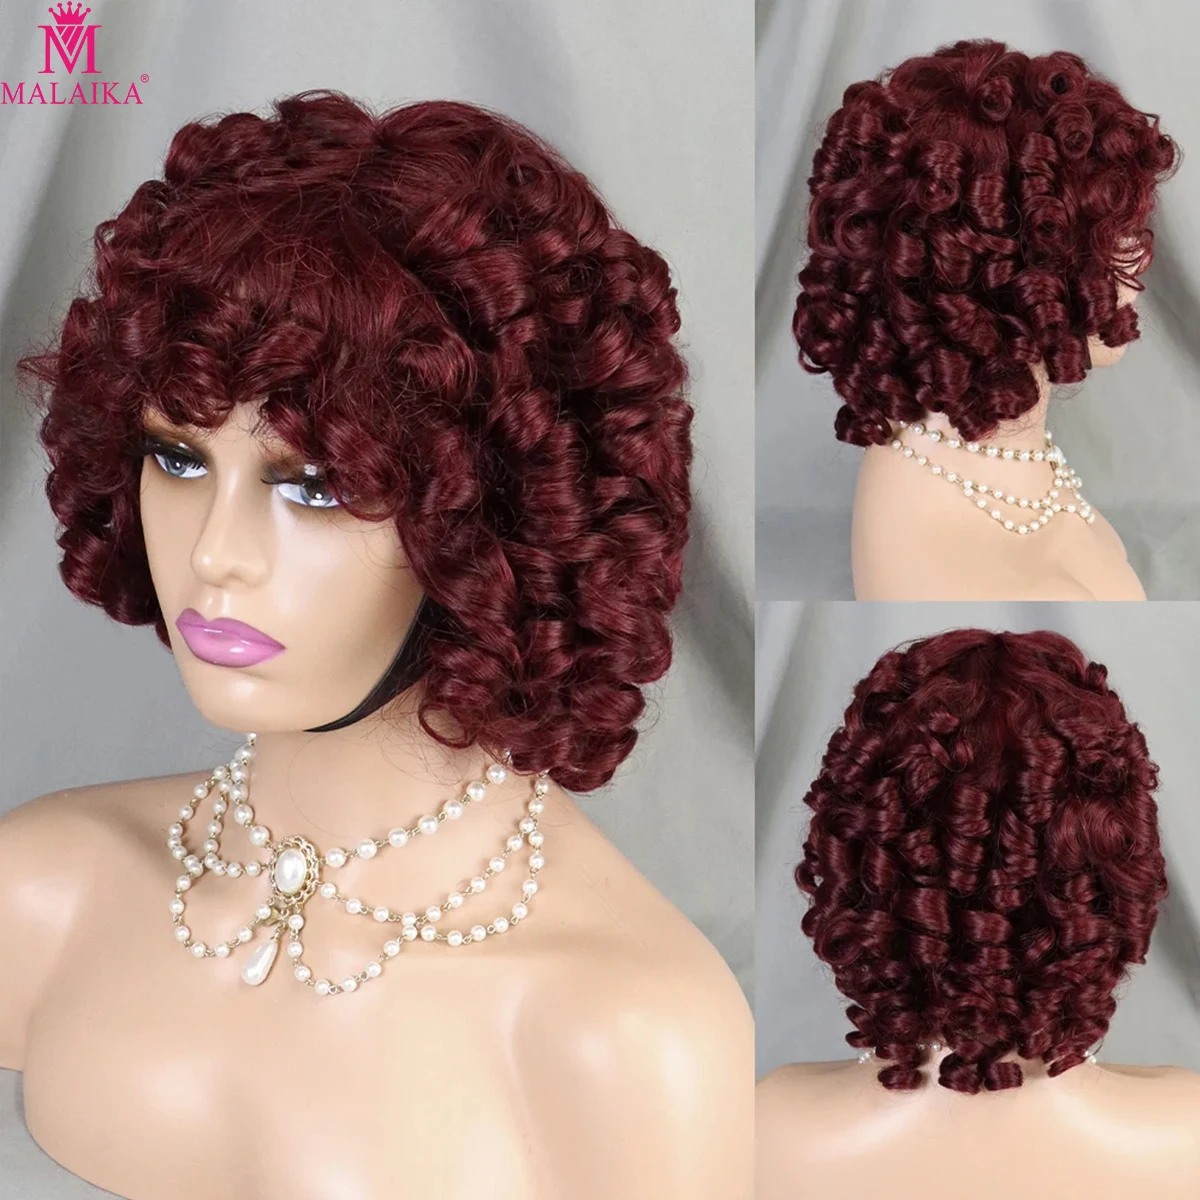 

99J Bouncy Curly Short Human hair Wigs Afro Curly Wig Glueless Human Hair Wig Full Machine Made Wig Ready to Wear for Women